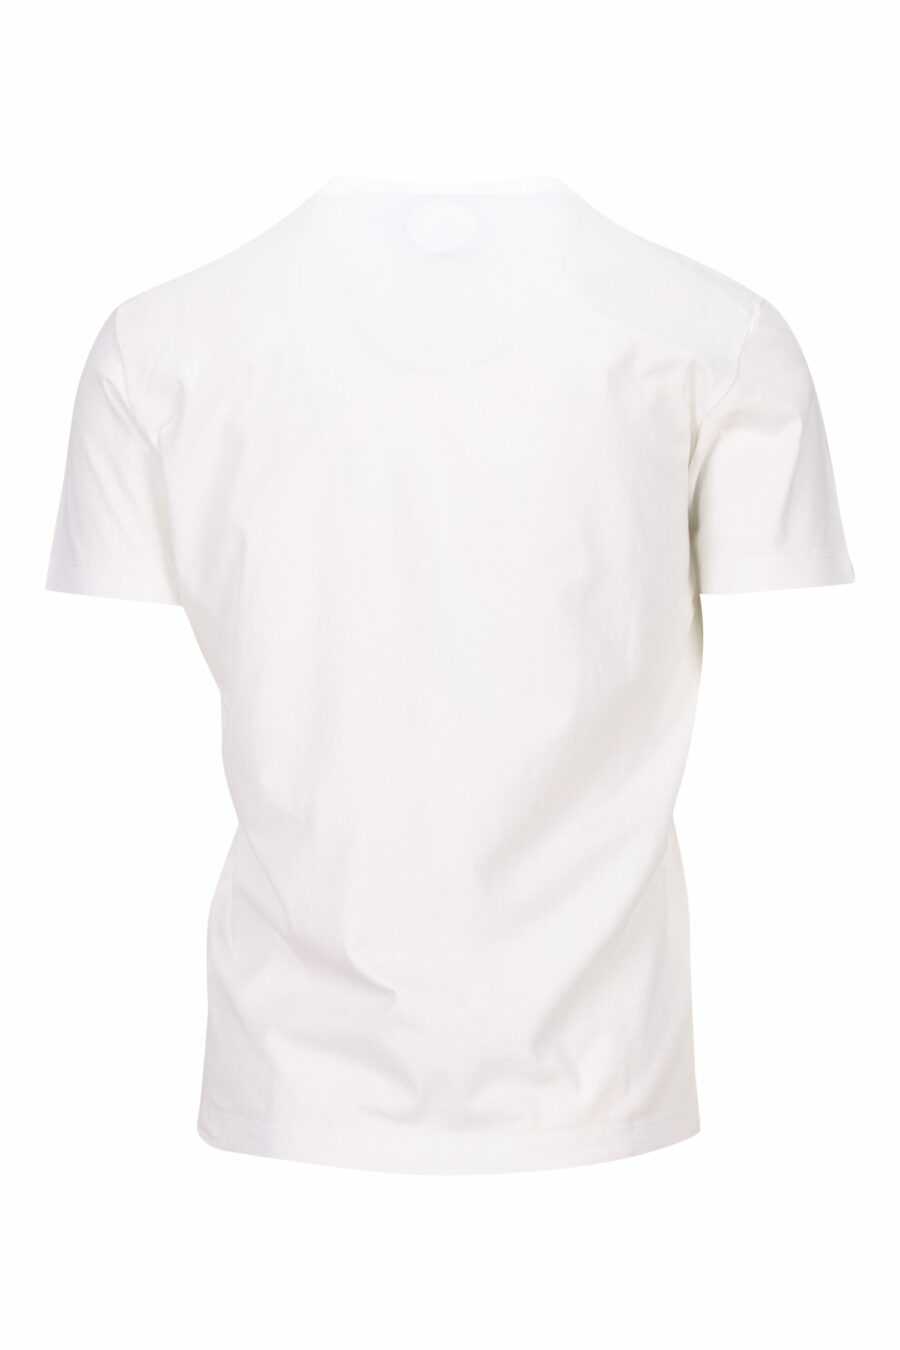 White T-shirt with logo on small plate - 8054148404369 1 scaled